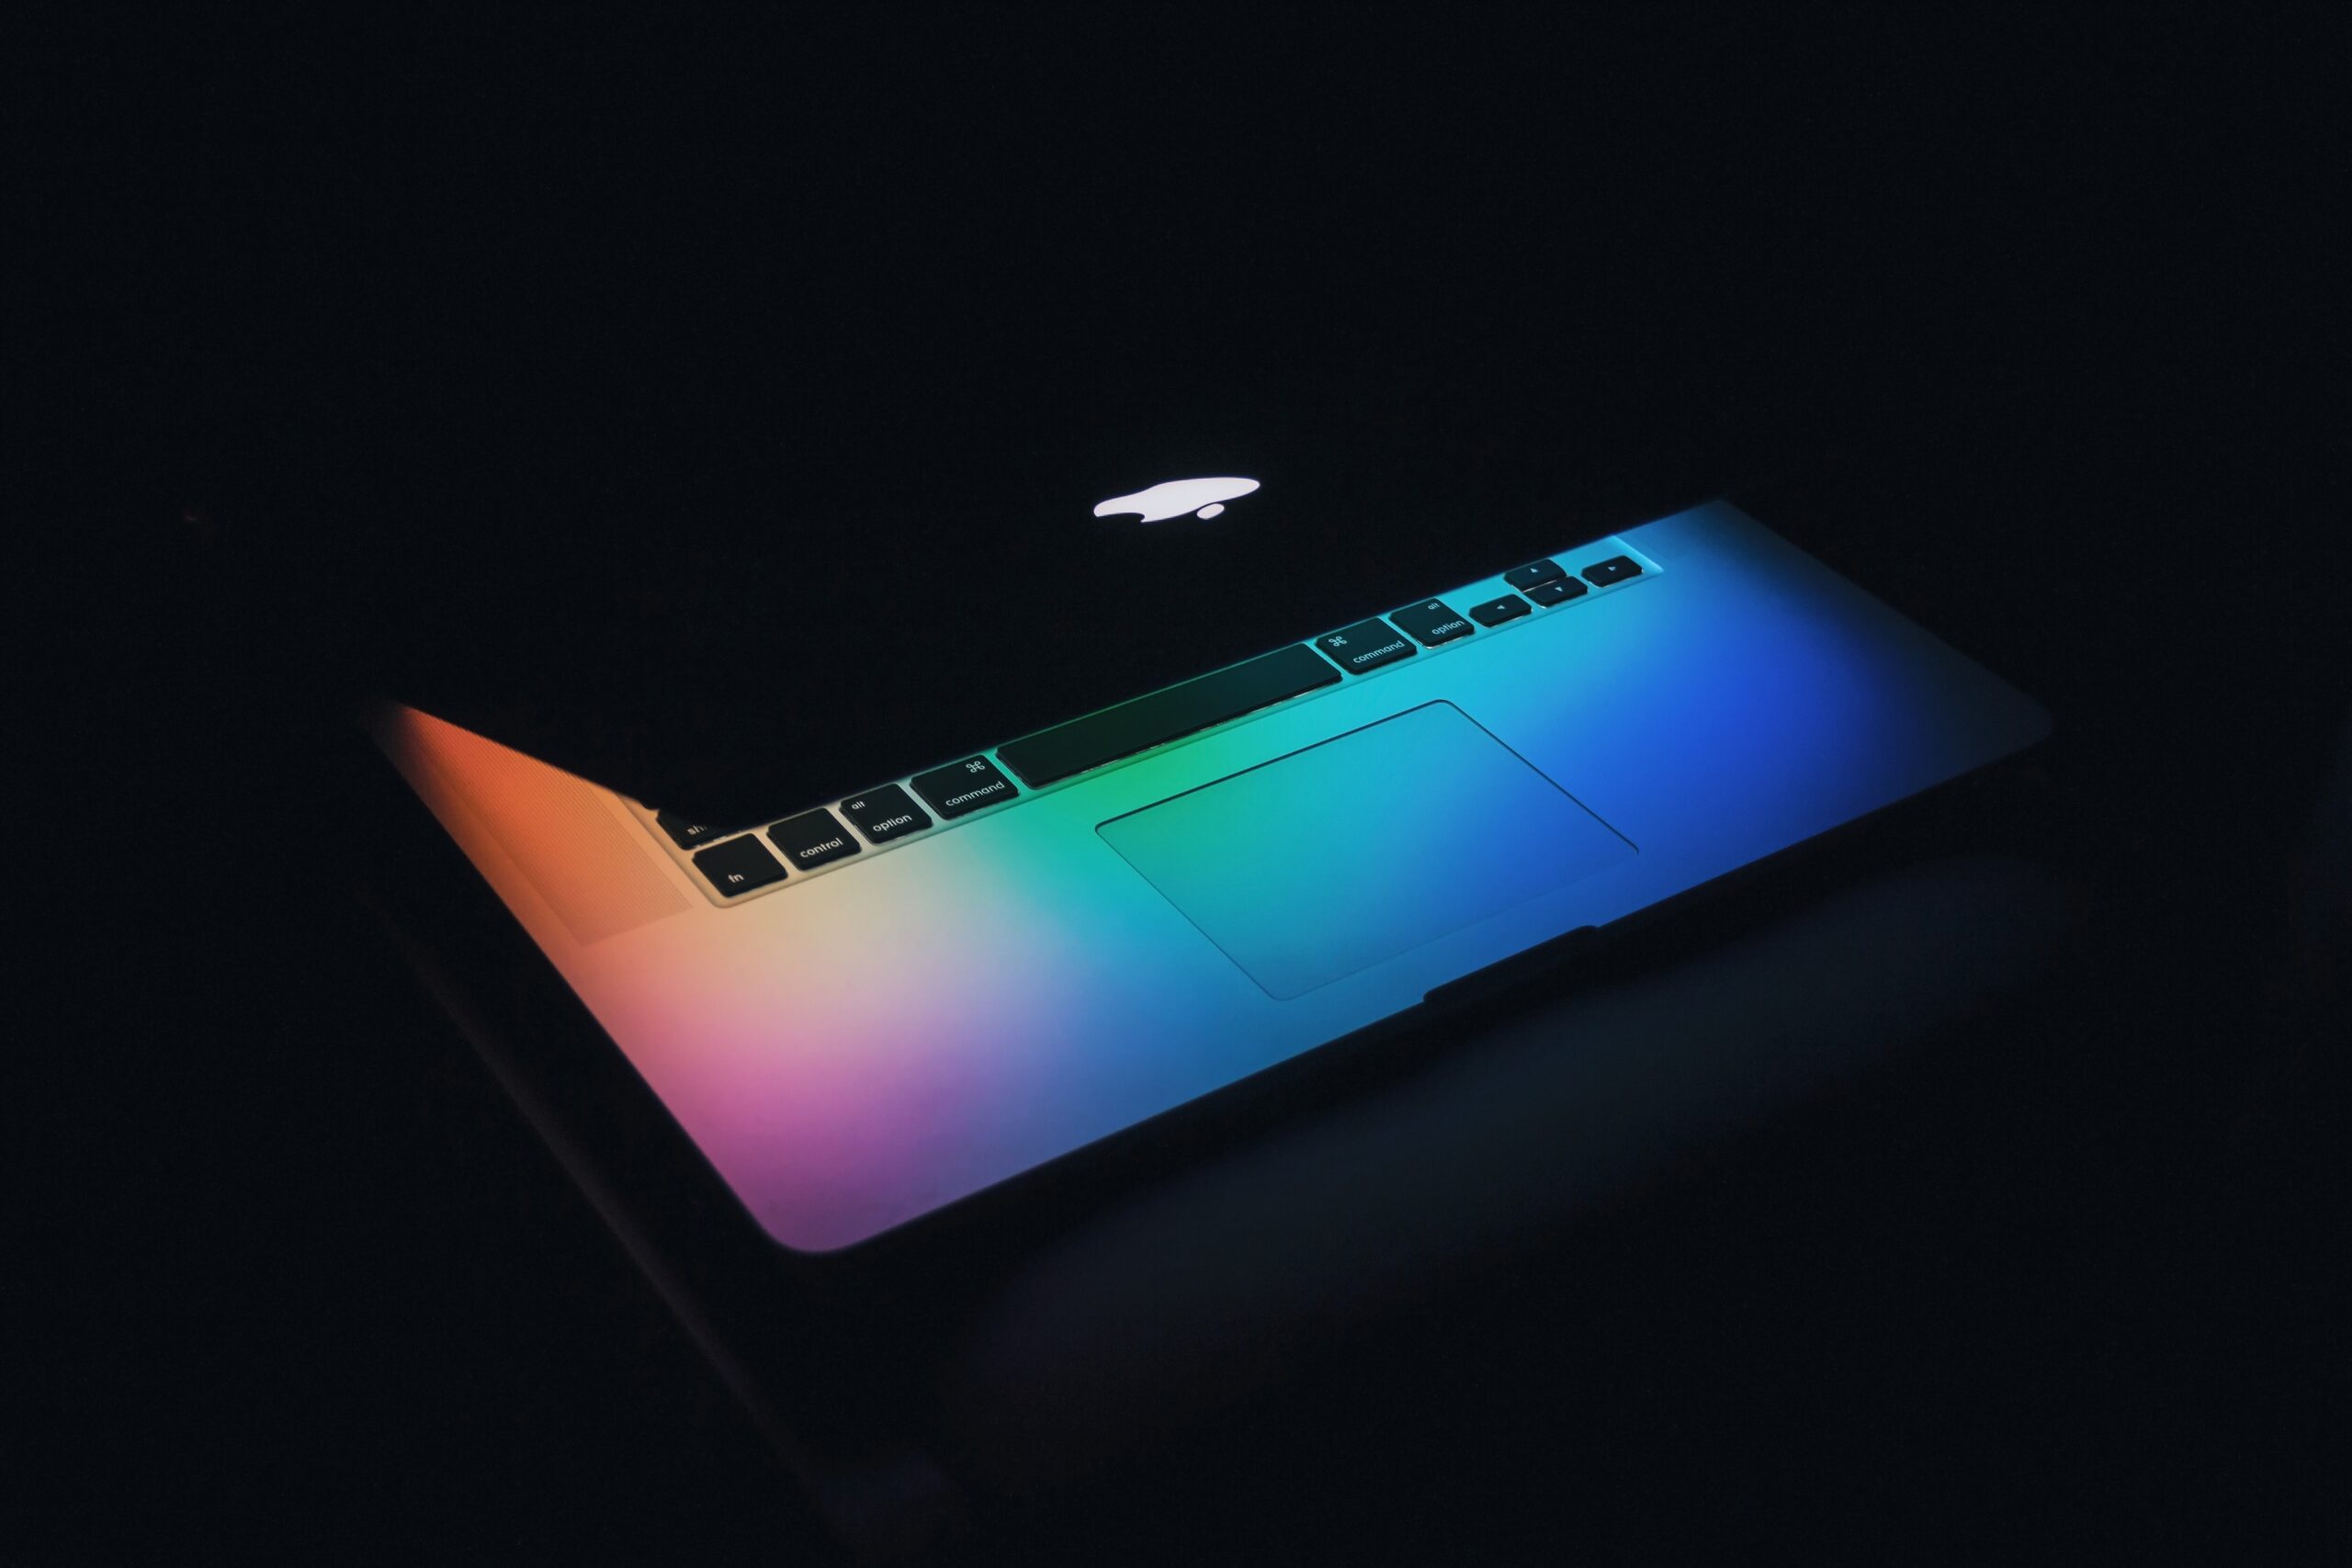 Colorful MacBook keyboard with light feat